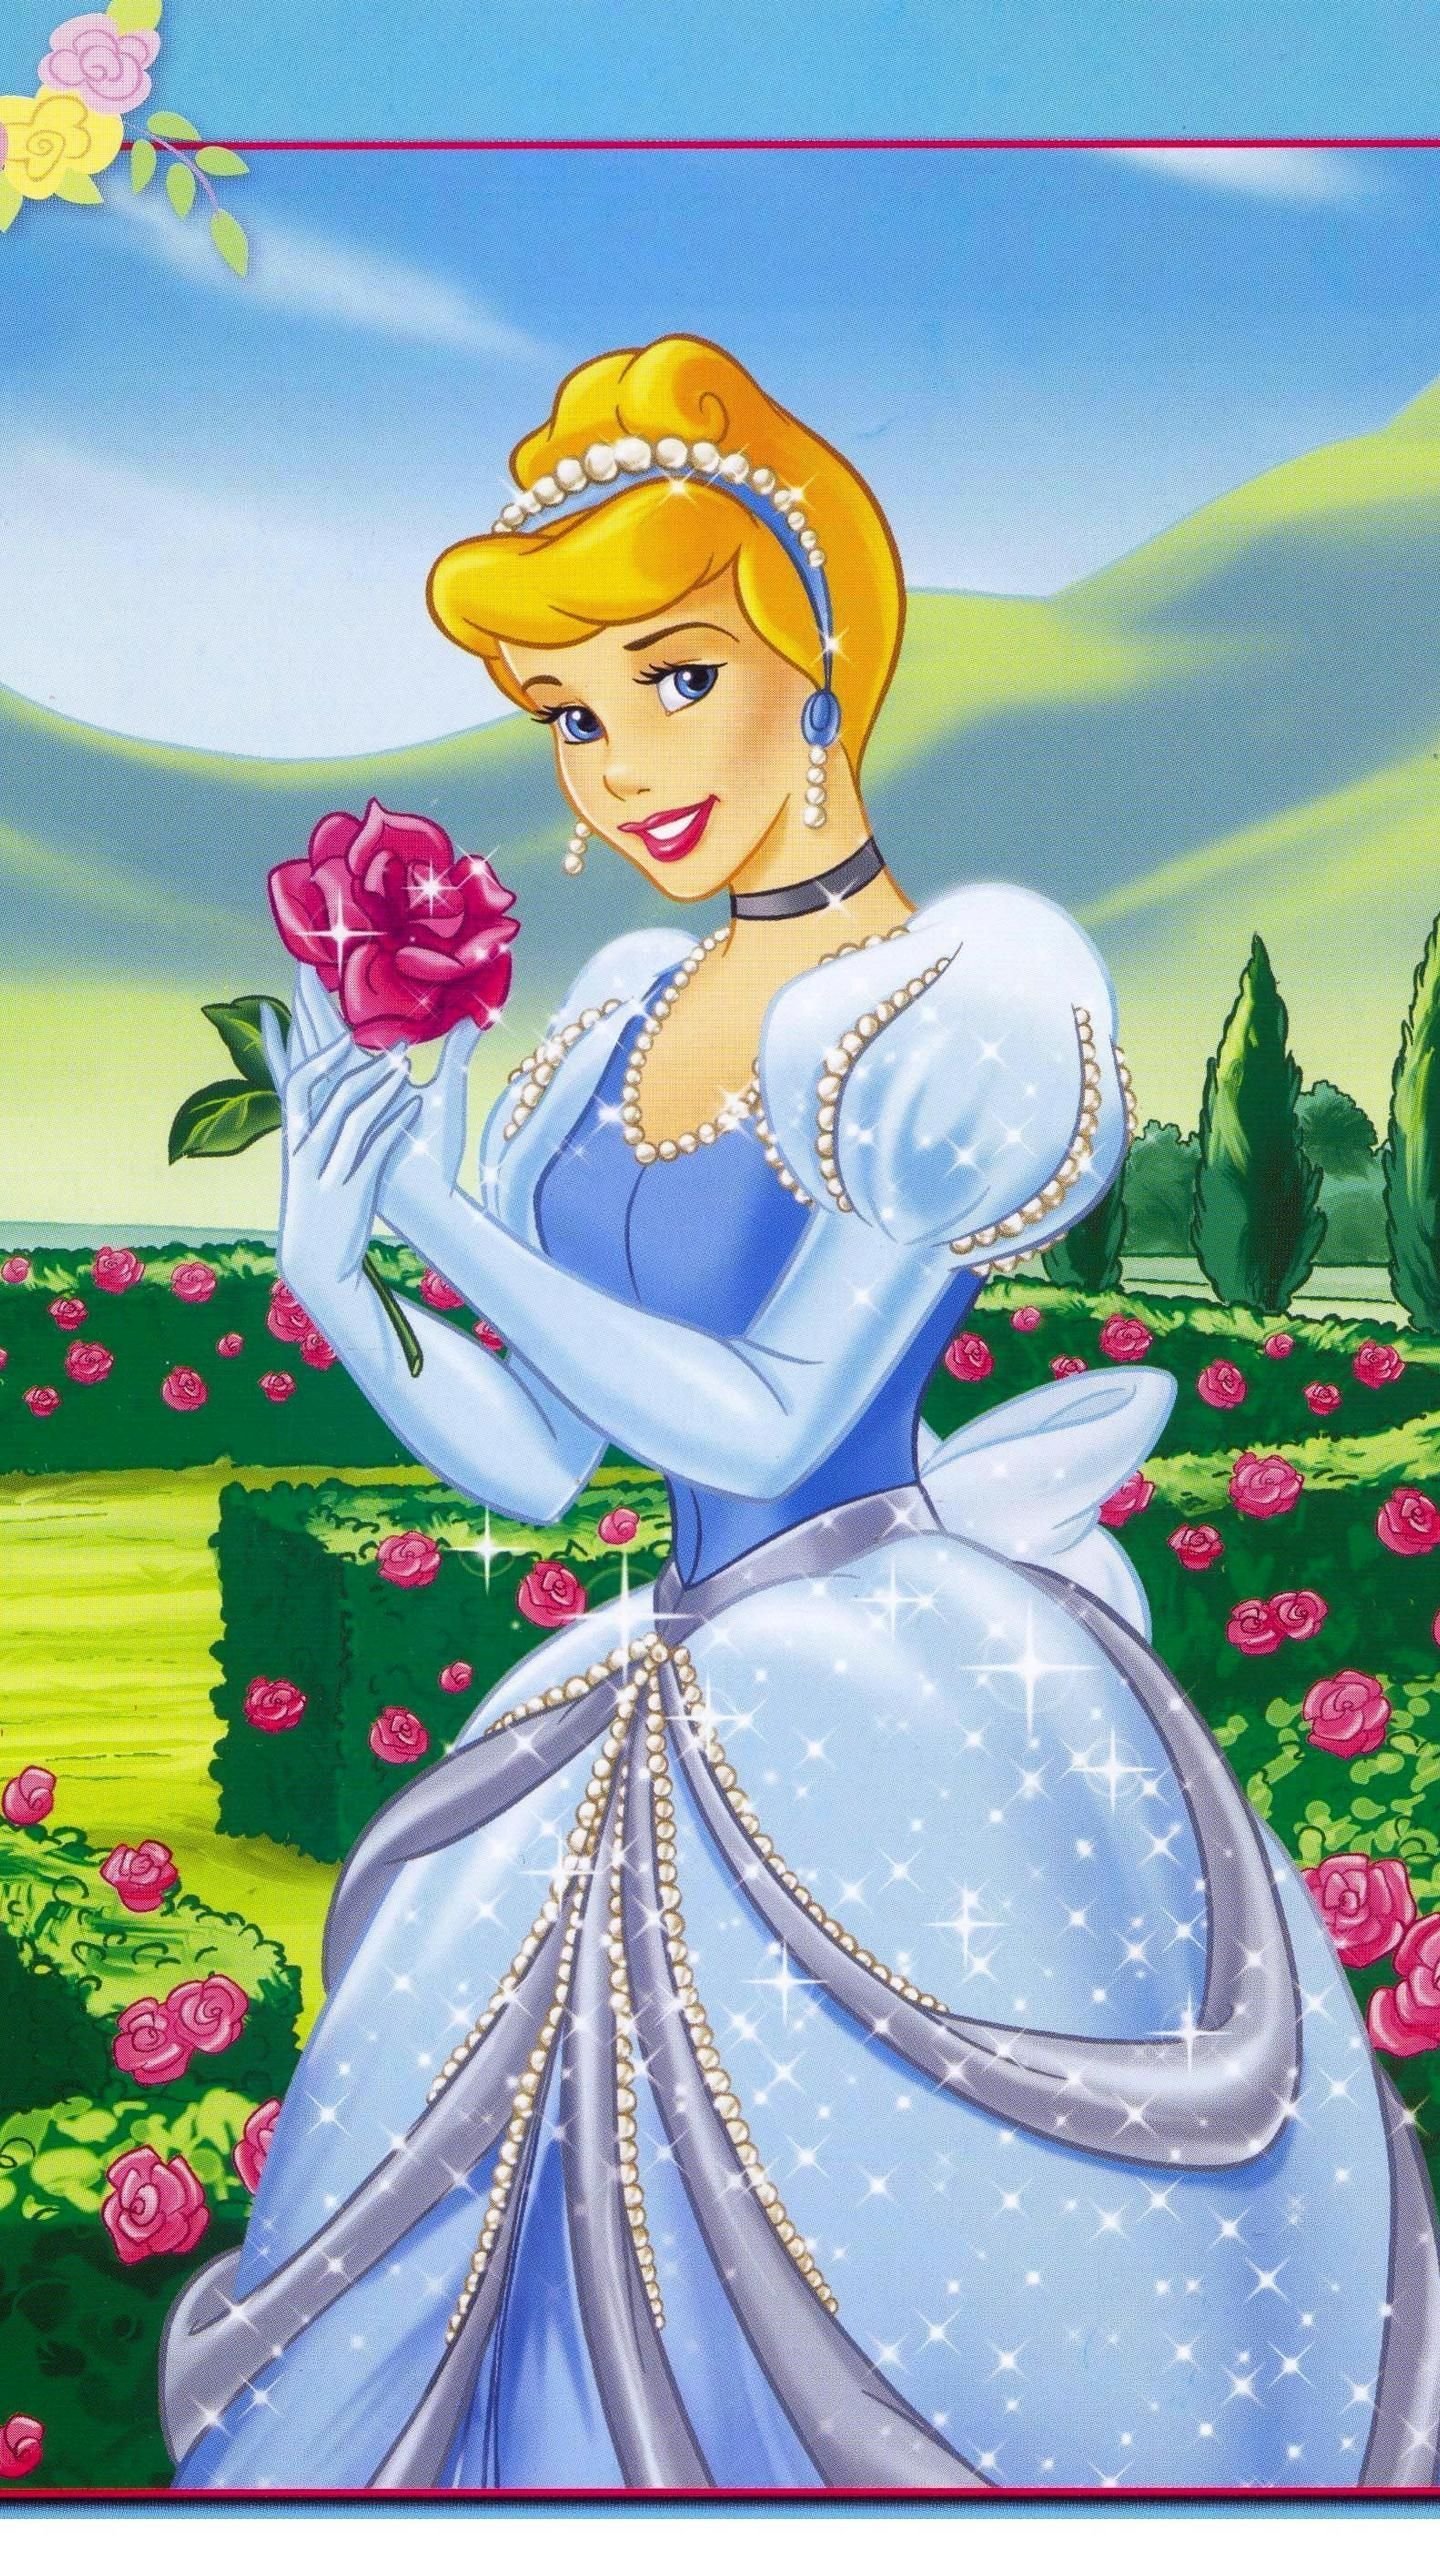 Sweet and romantic phone wallpapers with Disney Princess and Disney  characters - YouLoveIt.com